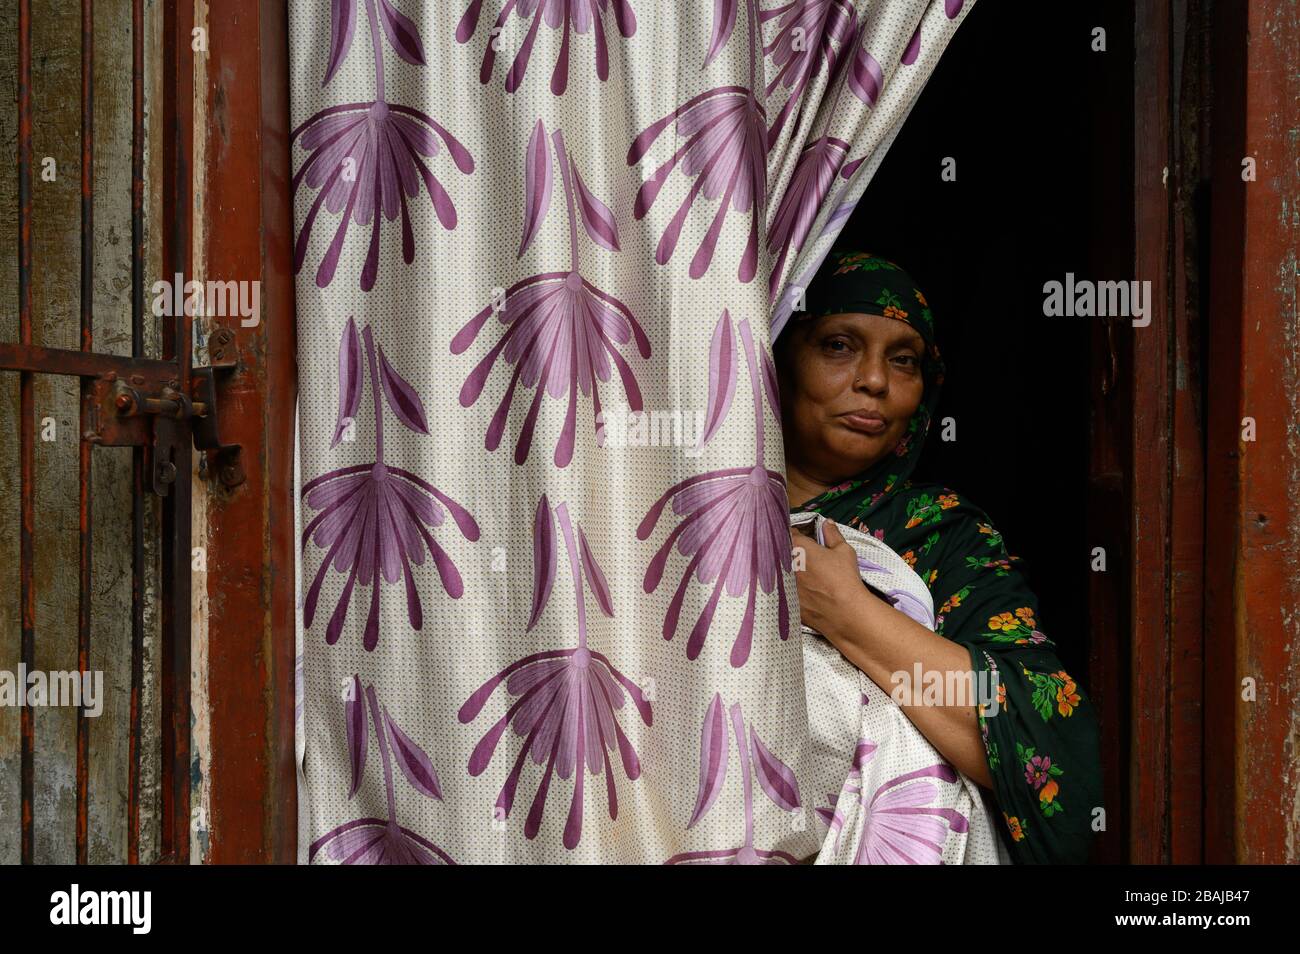 Portrait of a woman behind the curtains in front of her home, Madurai, India Stock Photo